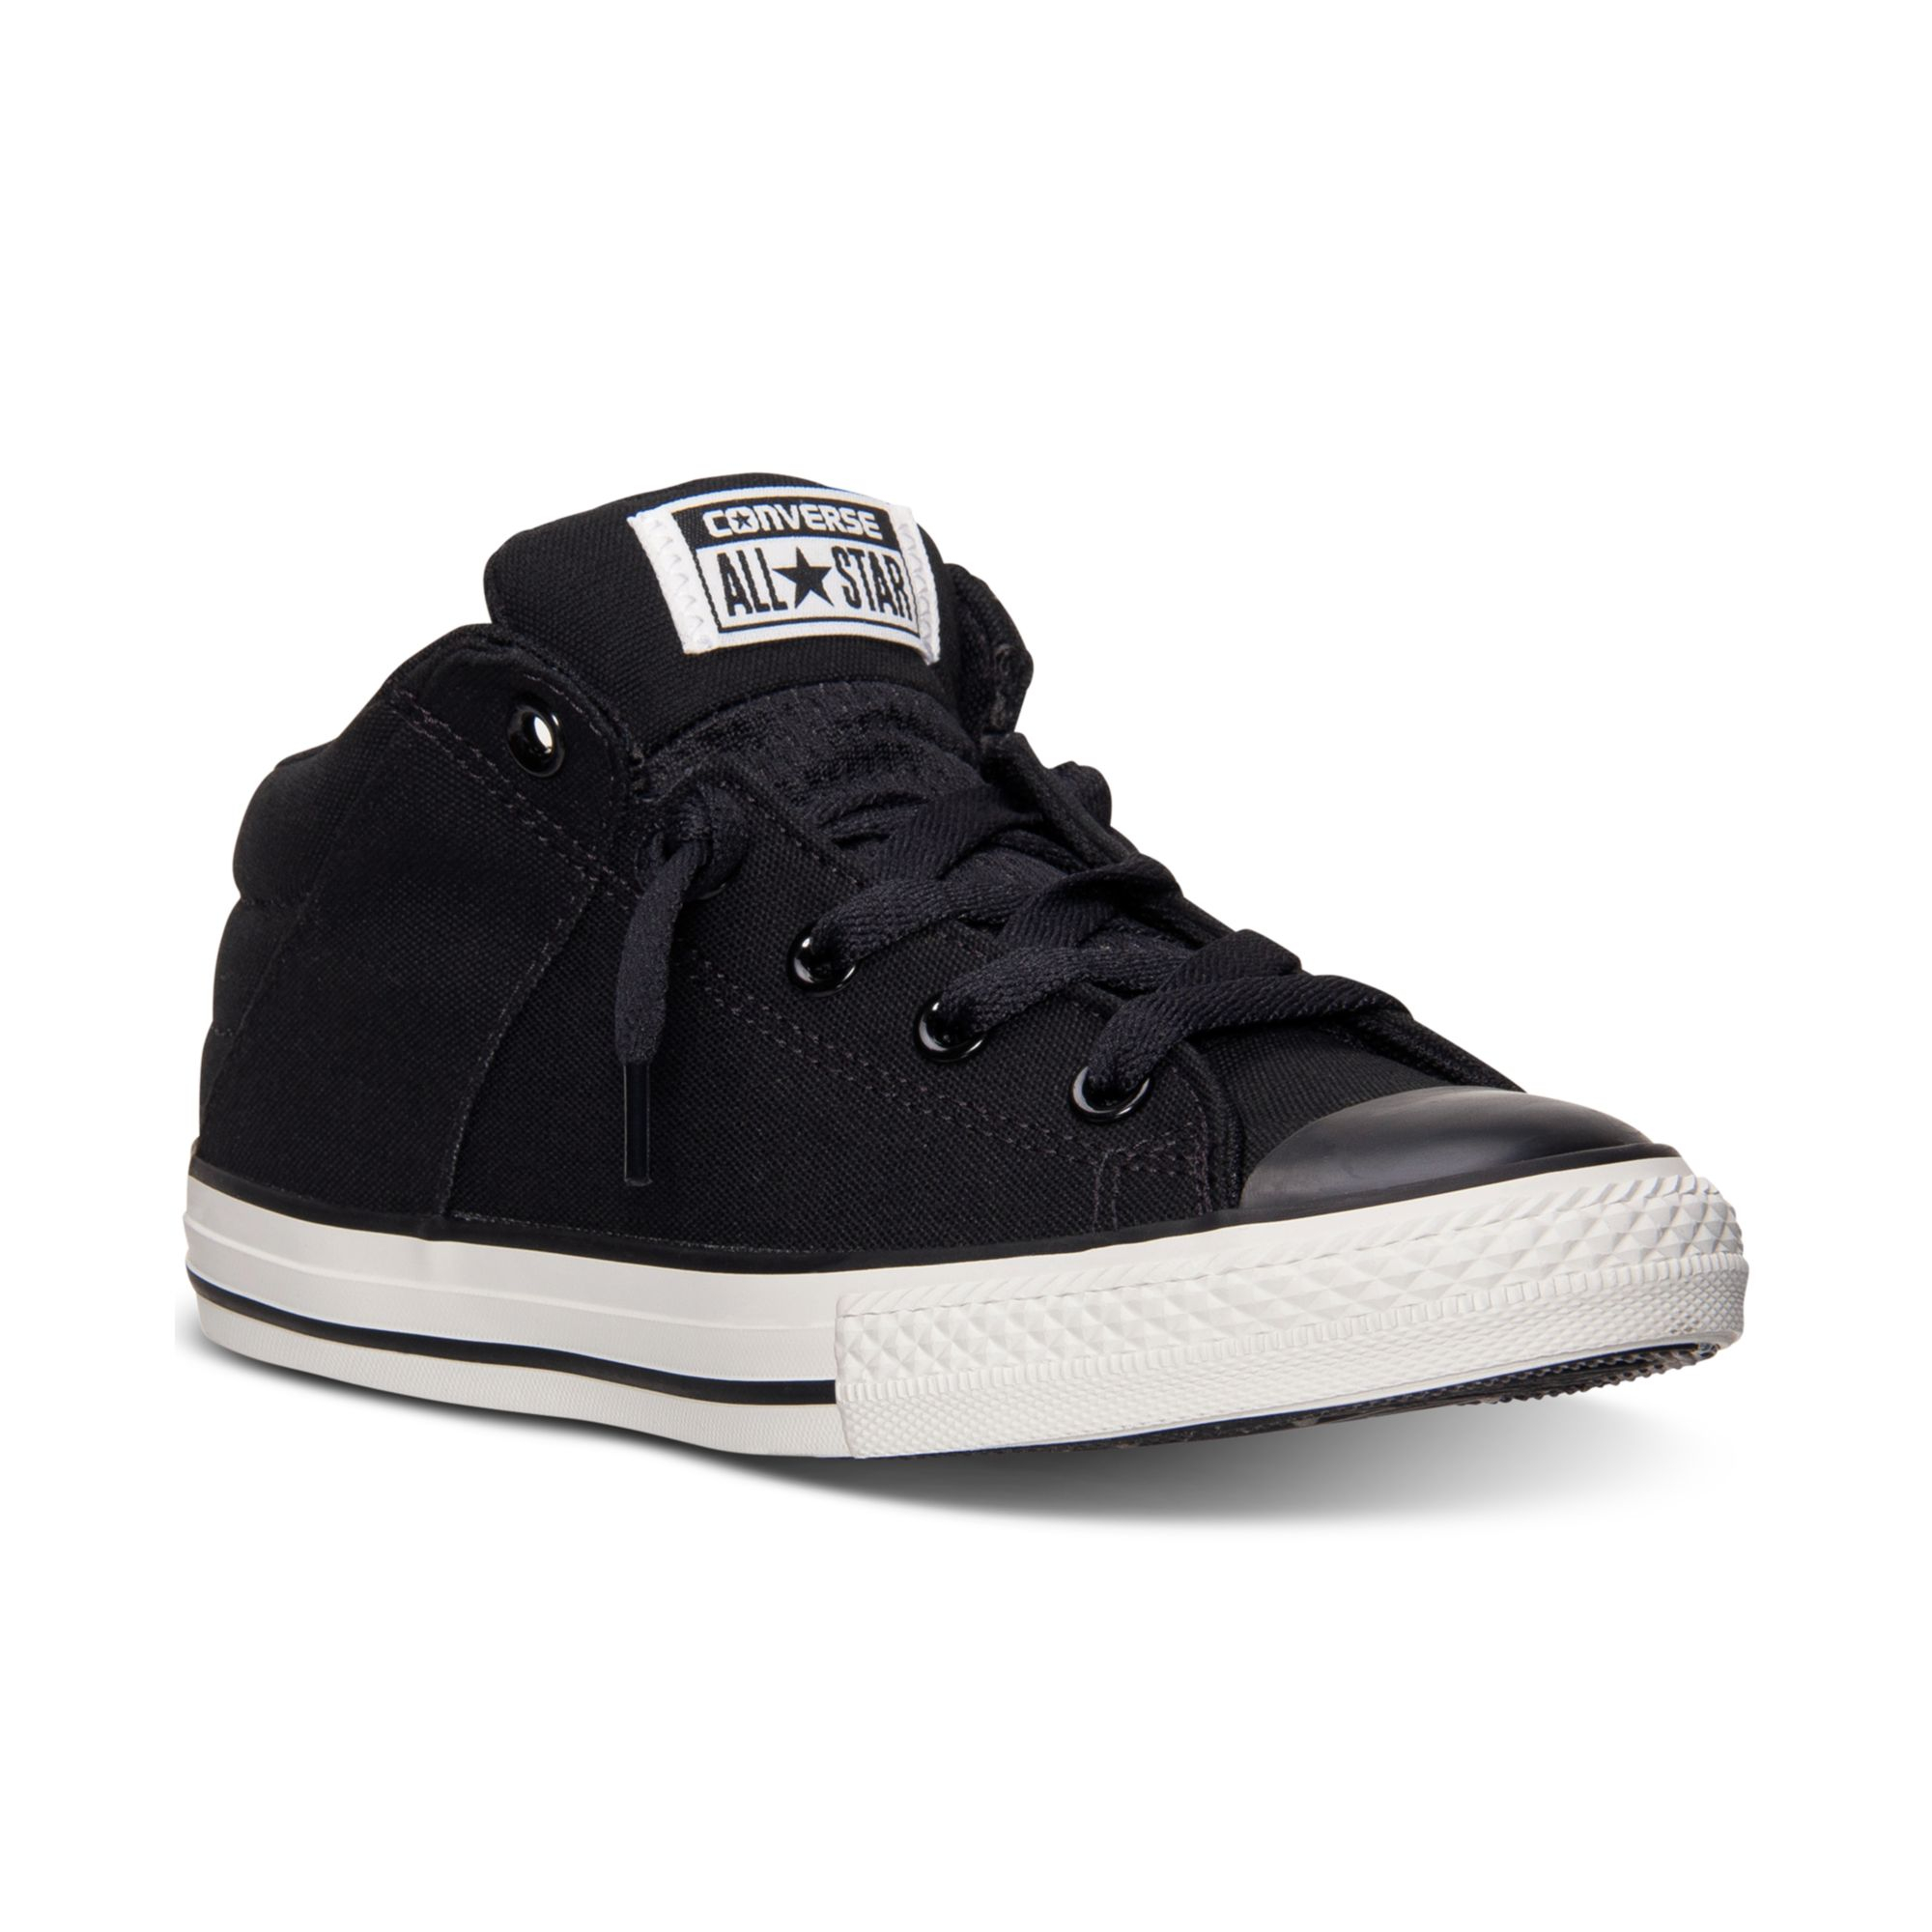 Converse Shoes For Men : Converse All Star 12 American Mid Black ...